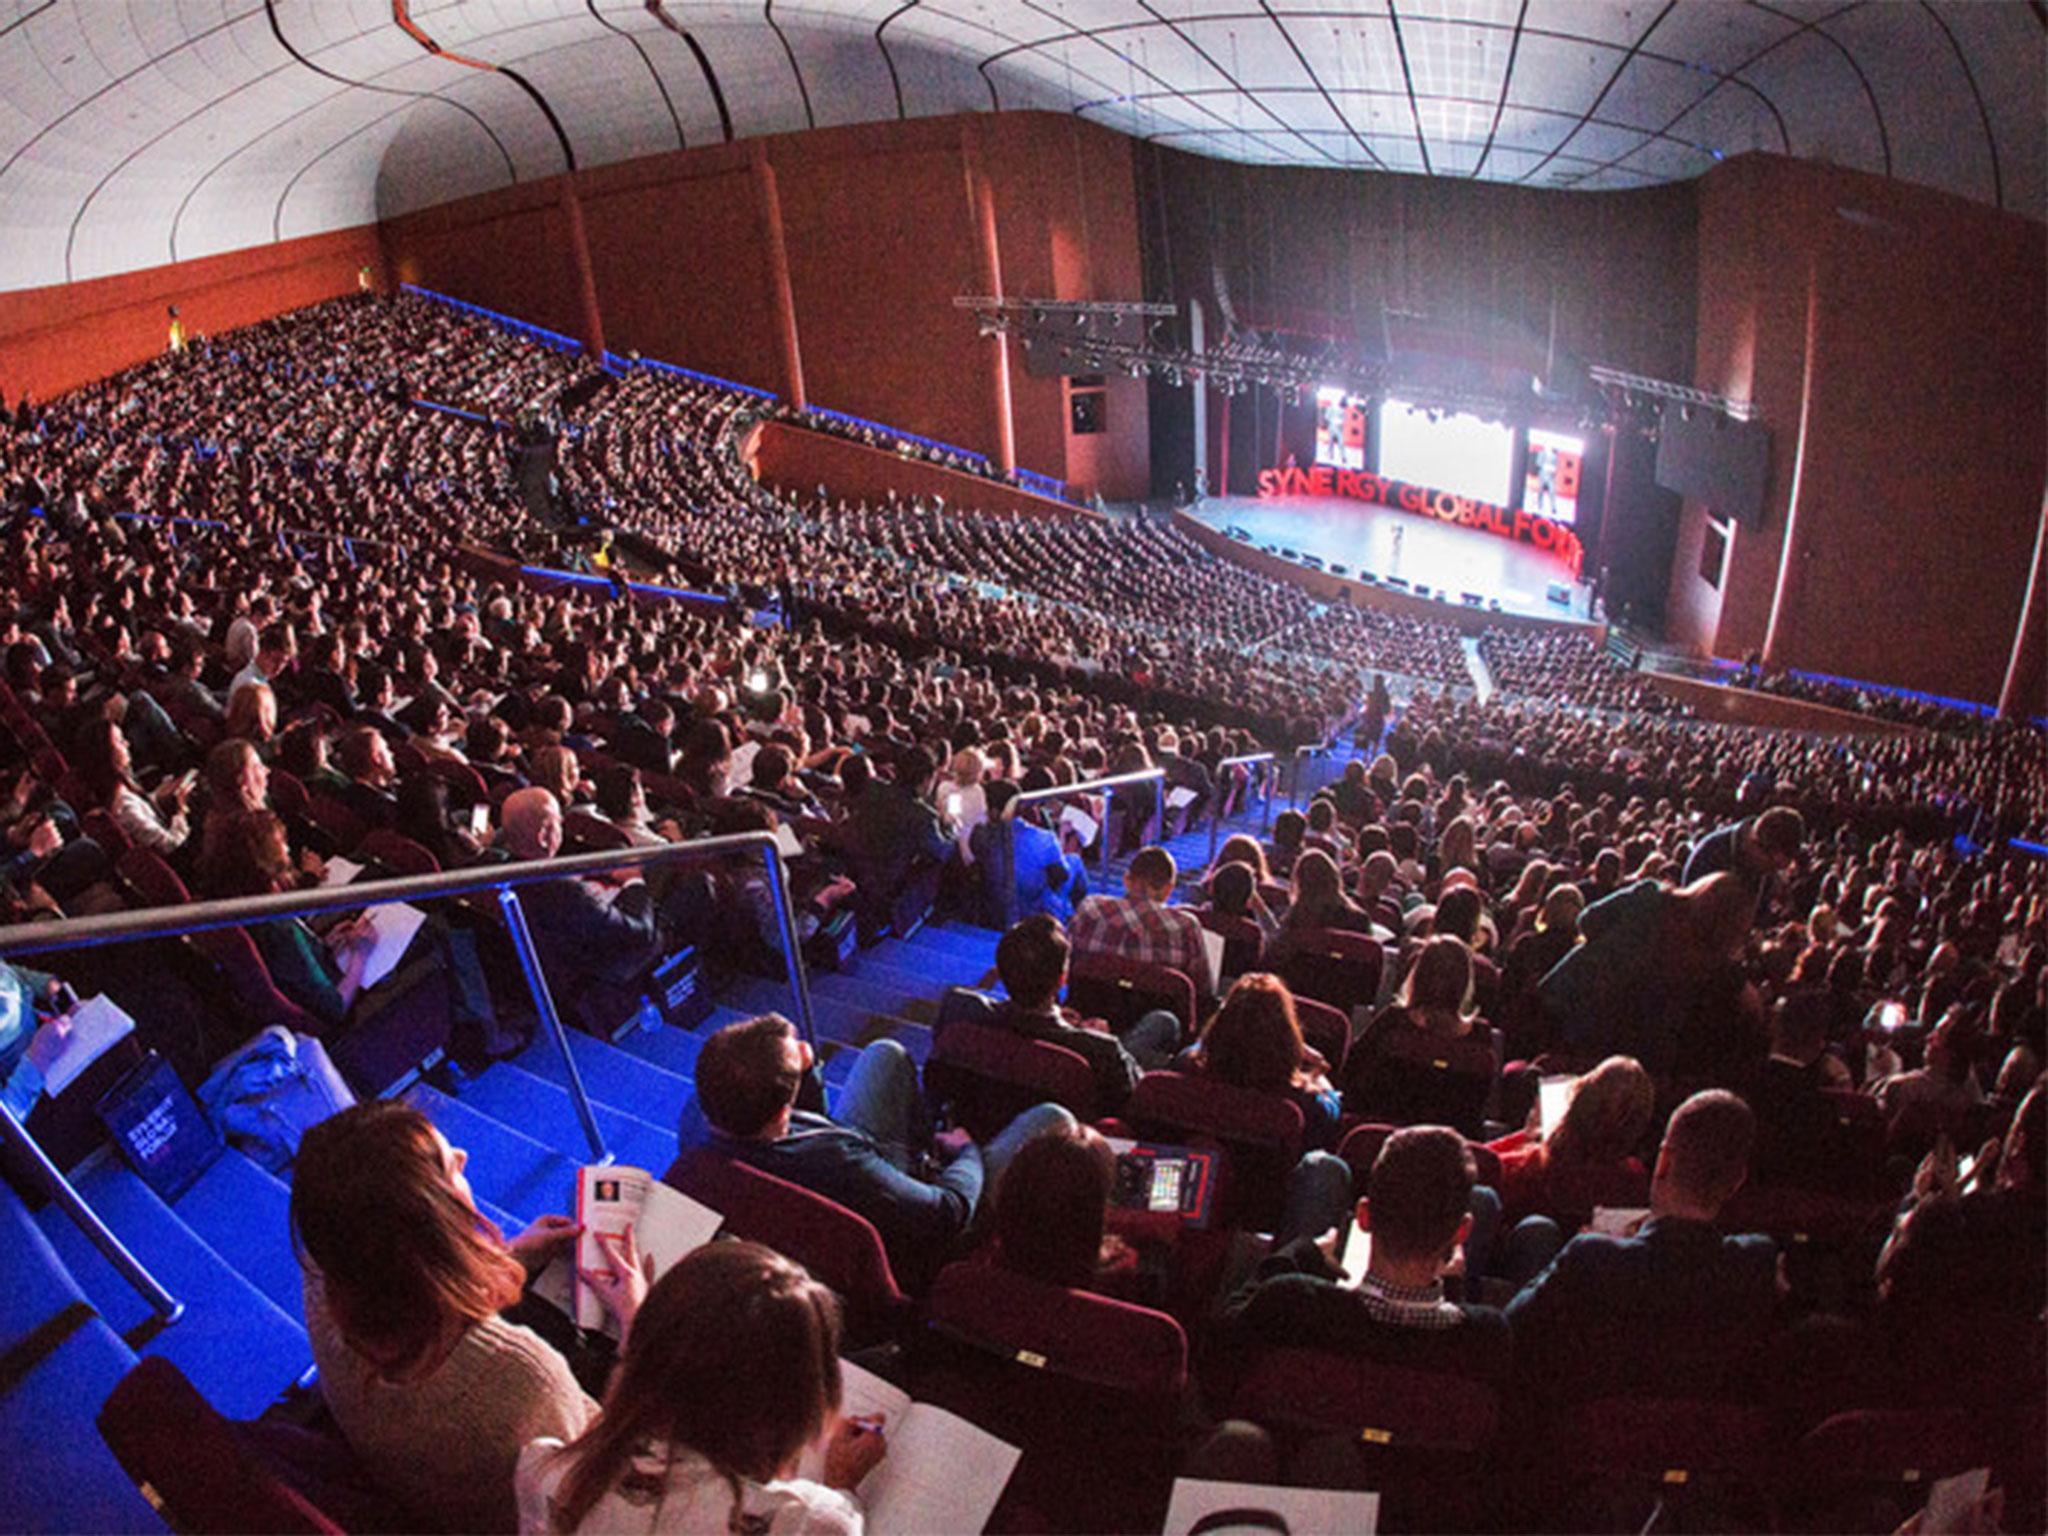 The Synergy Global Forum is held in The Theater in Madison Square Garden